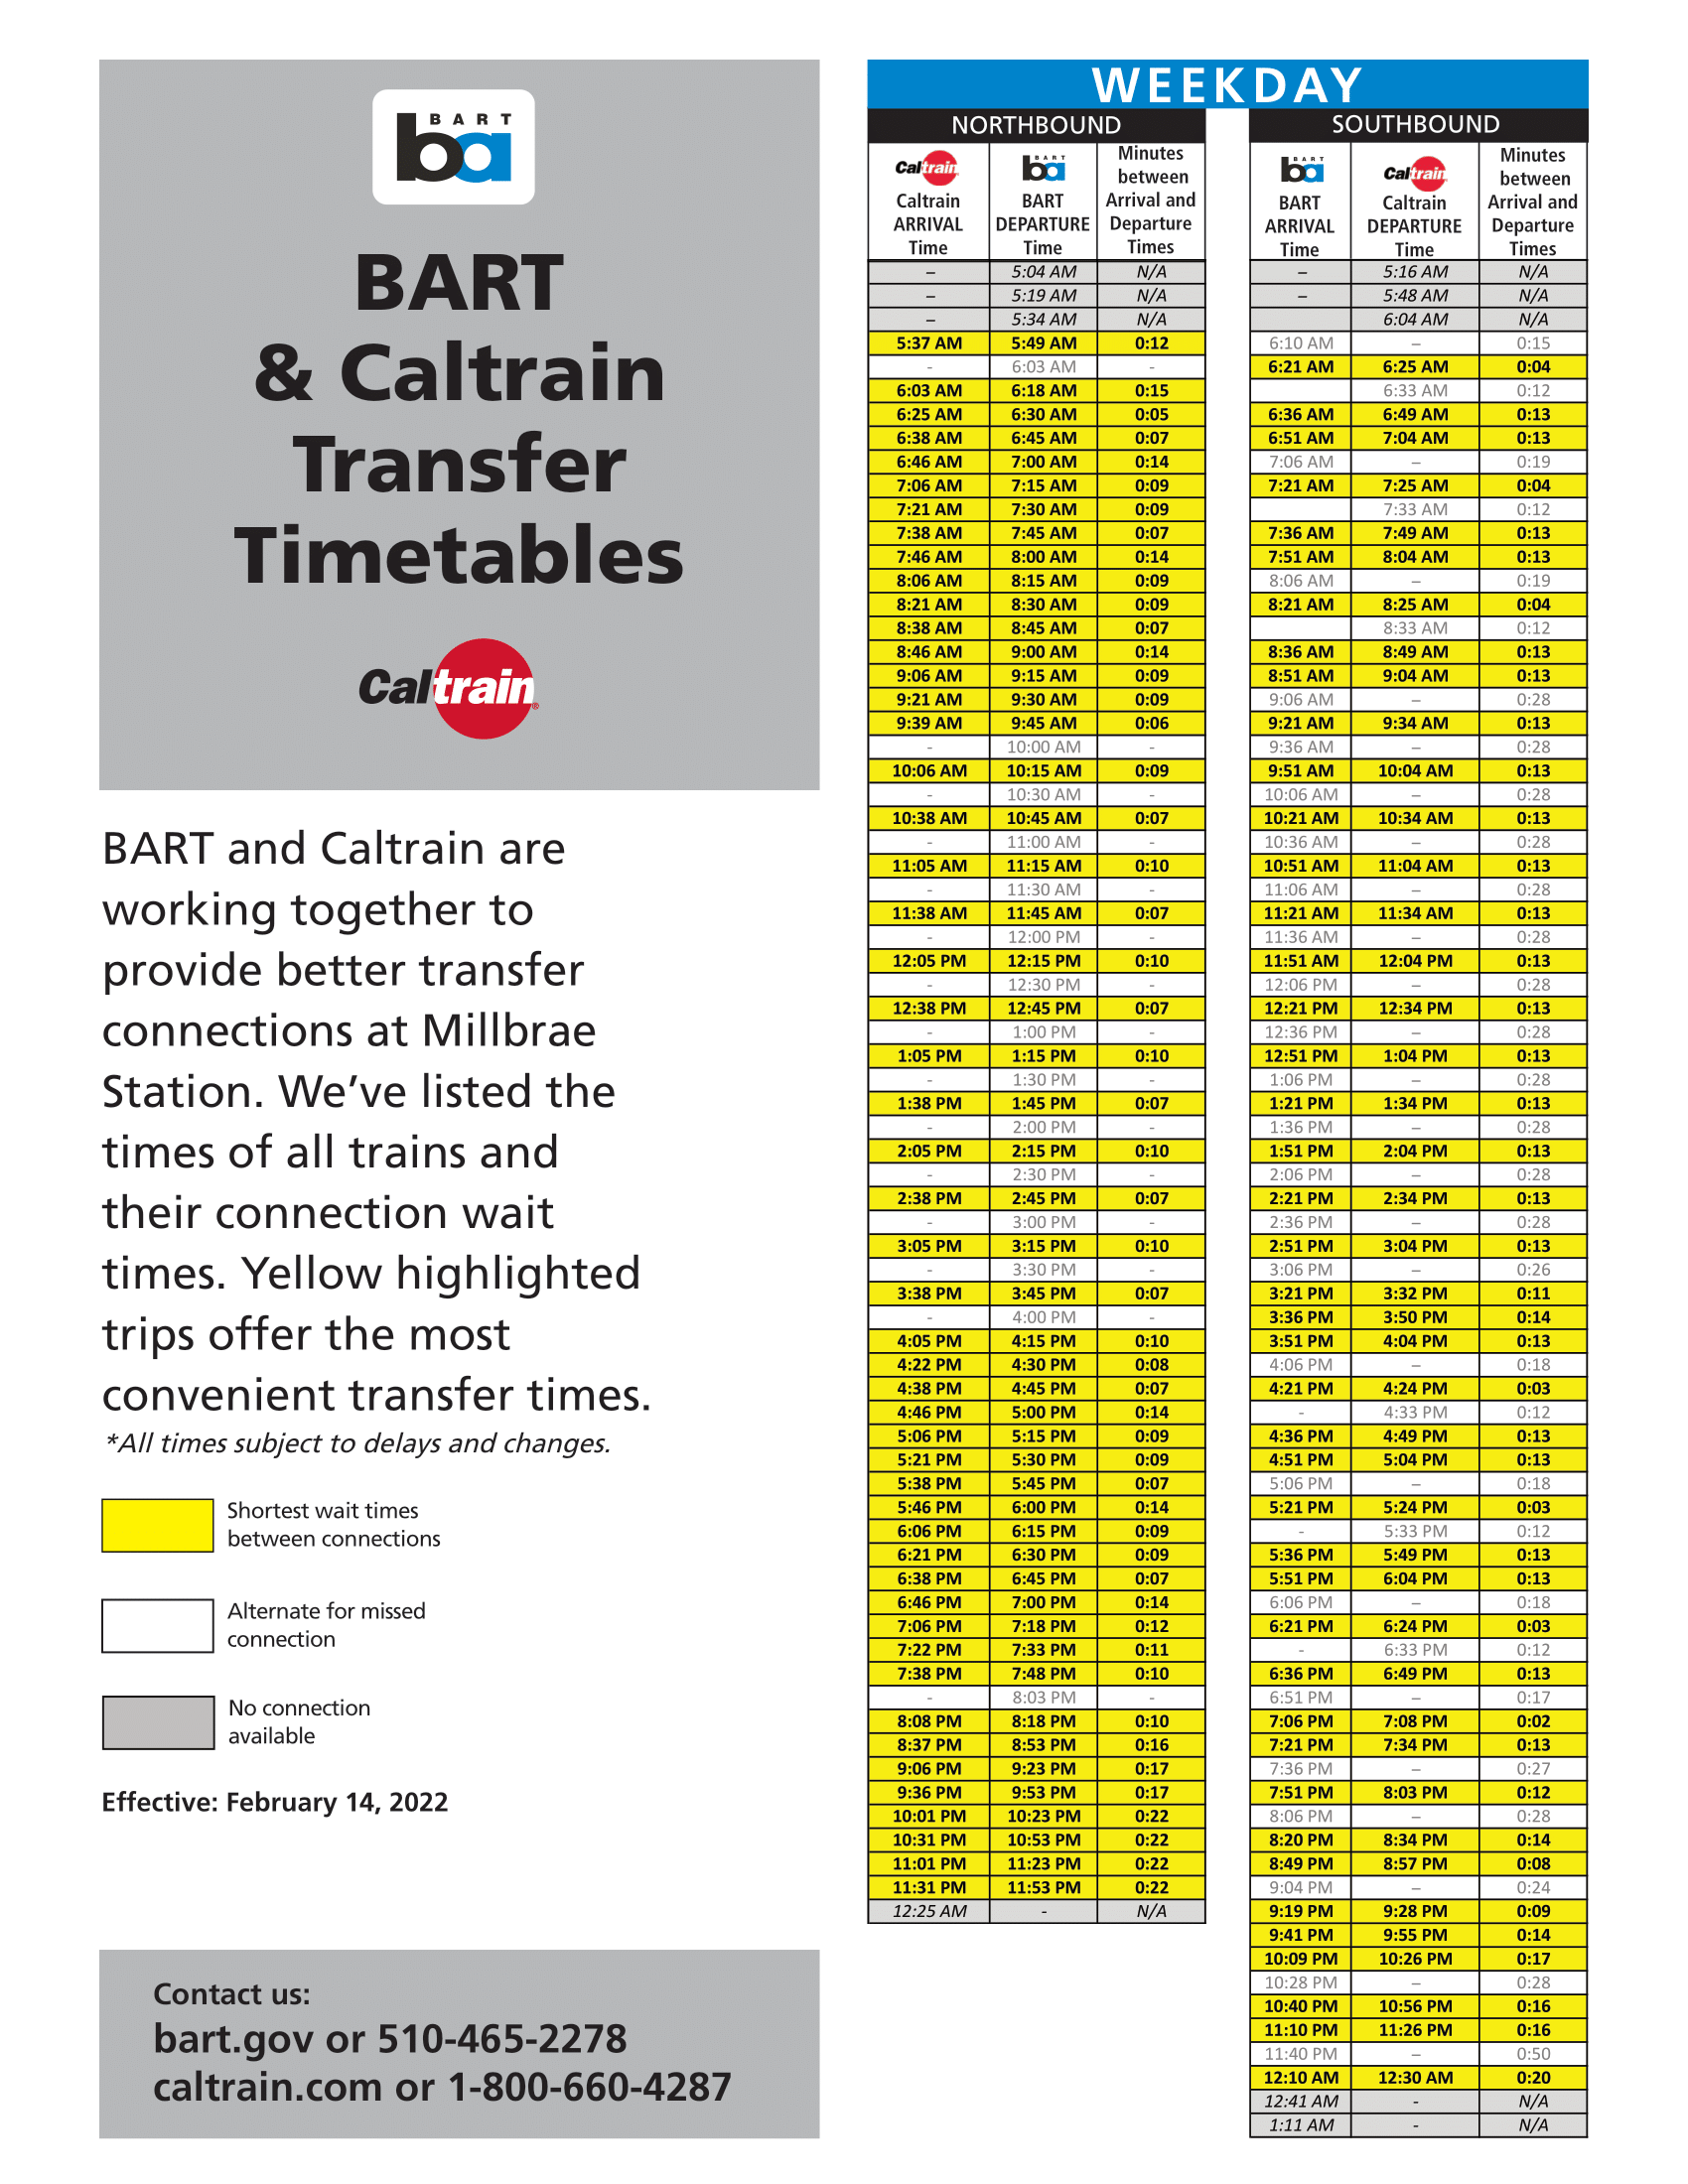 BART and Caltrain update Millbrae transfer timetable for 2/14/22